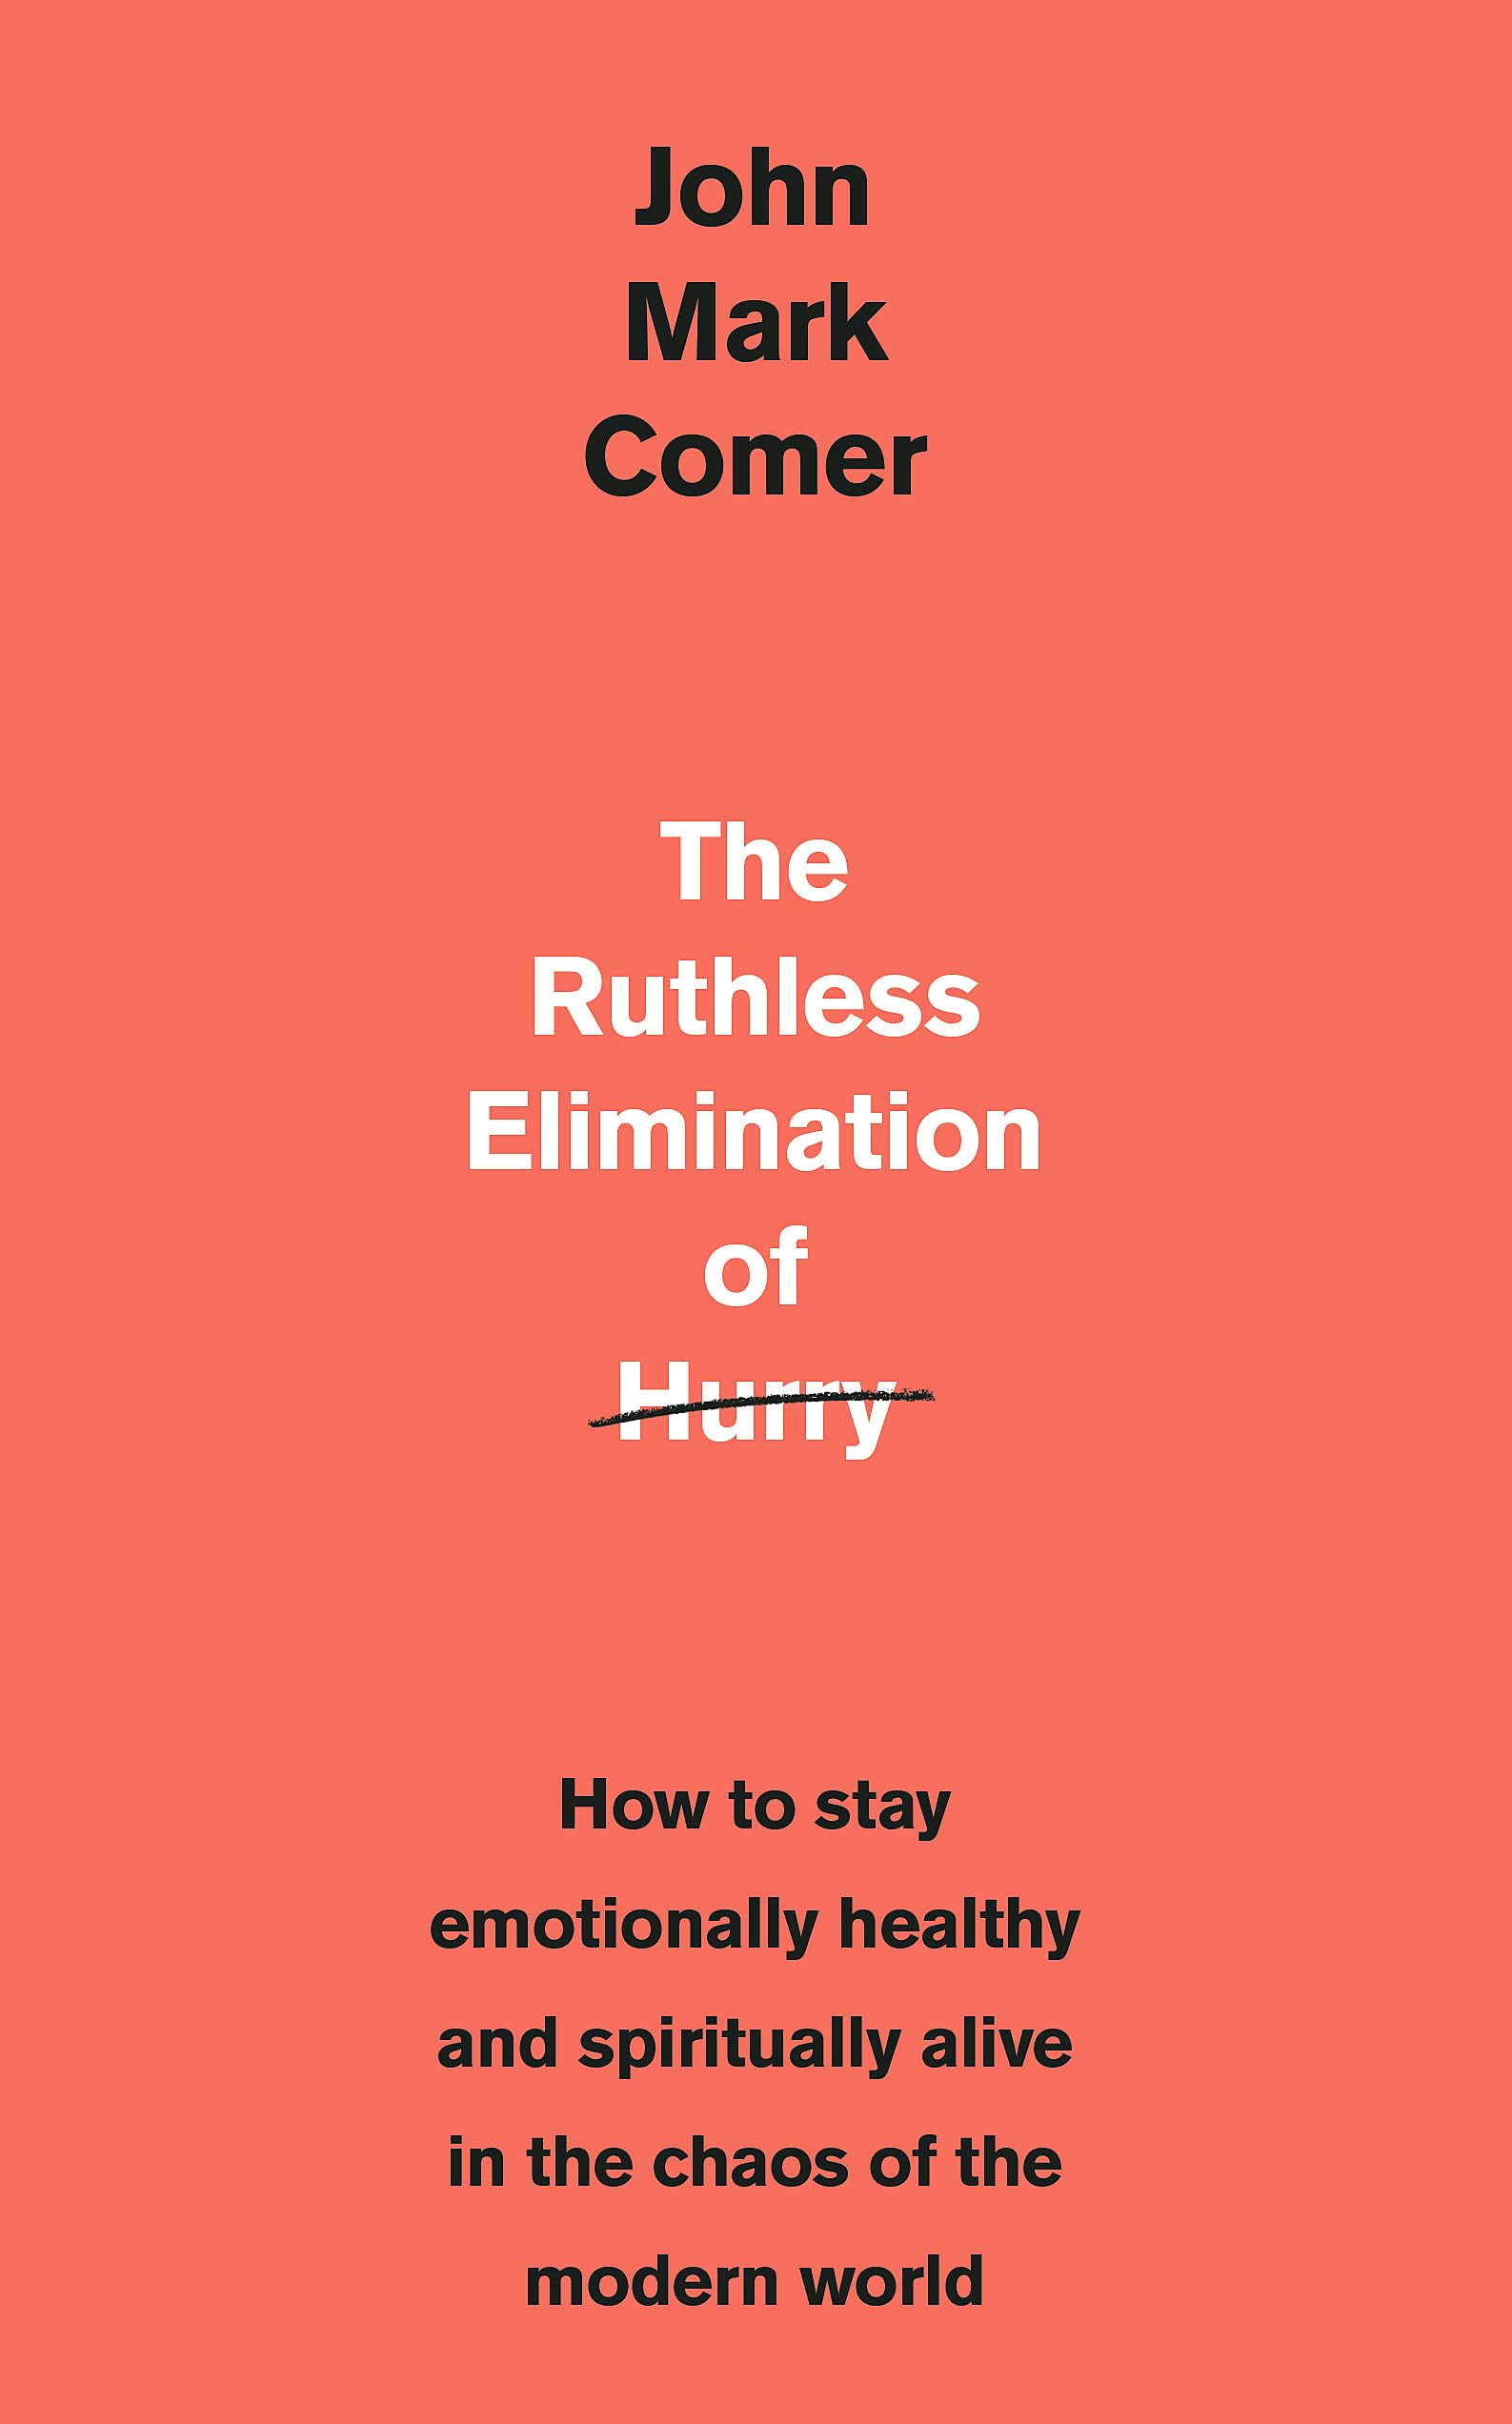 The Ruthless Elimination of Hurry - Book Recommendation